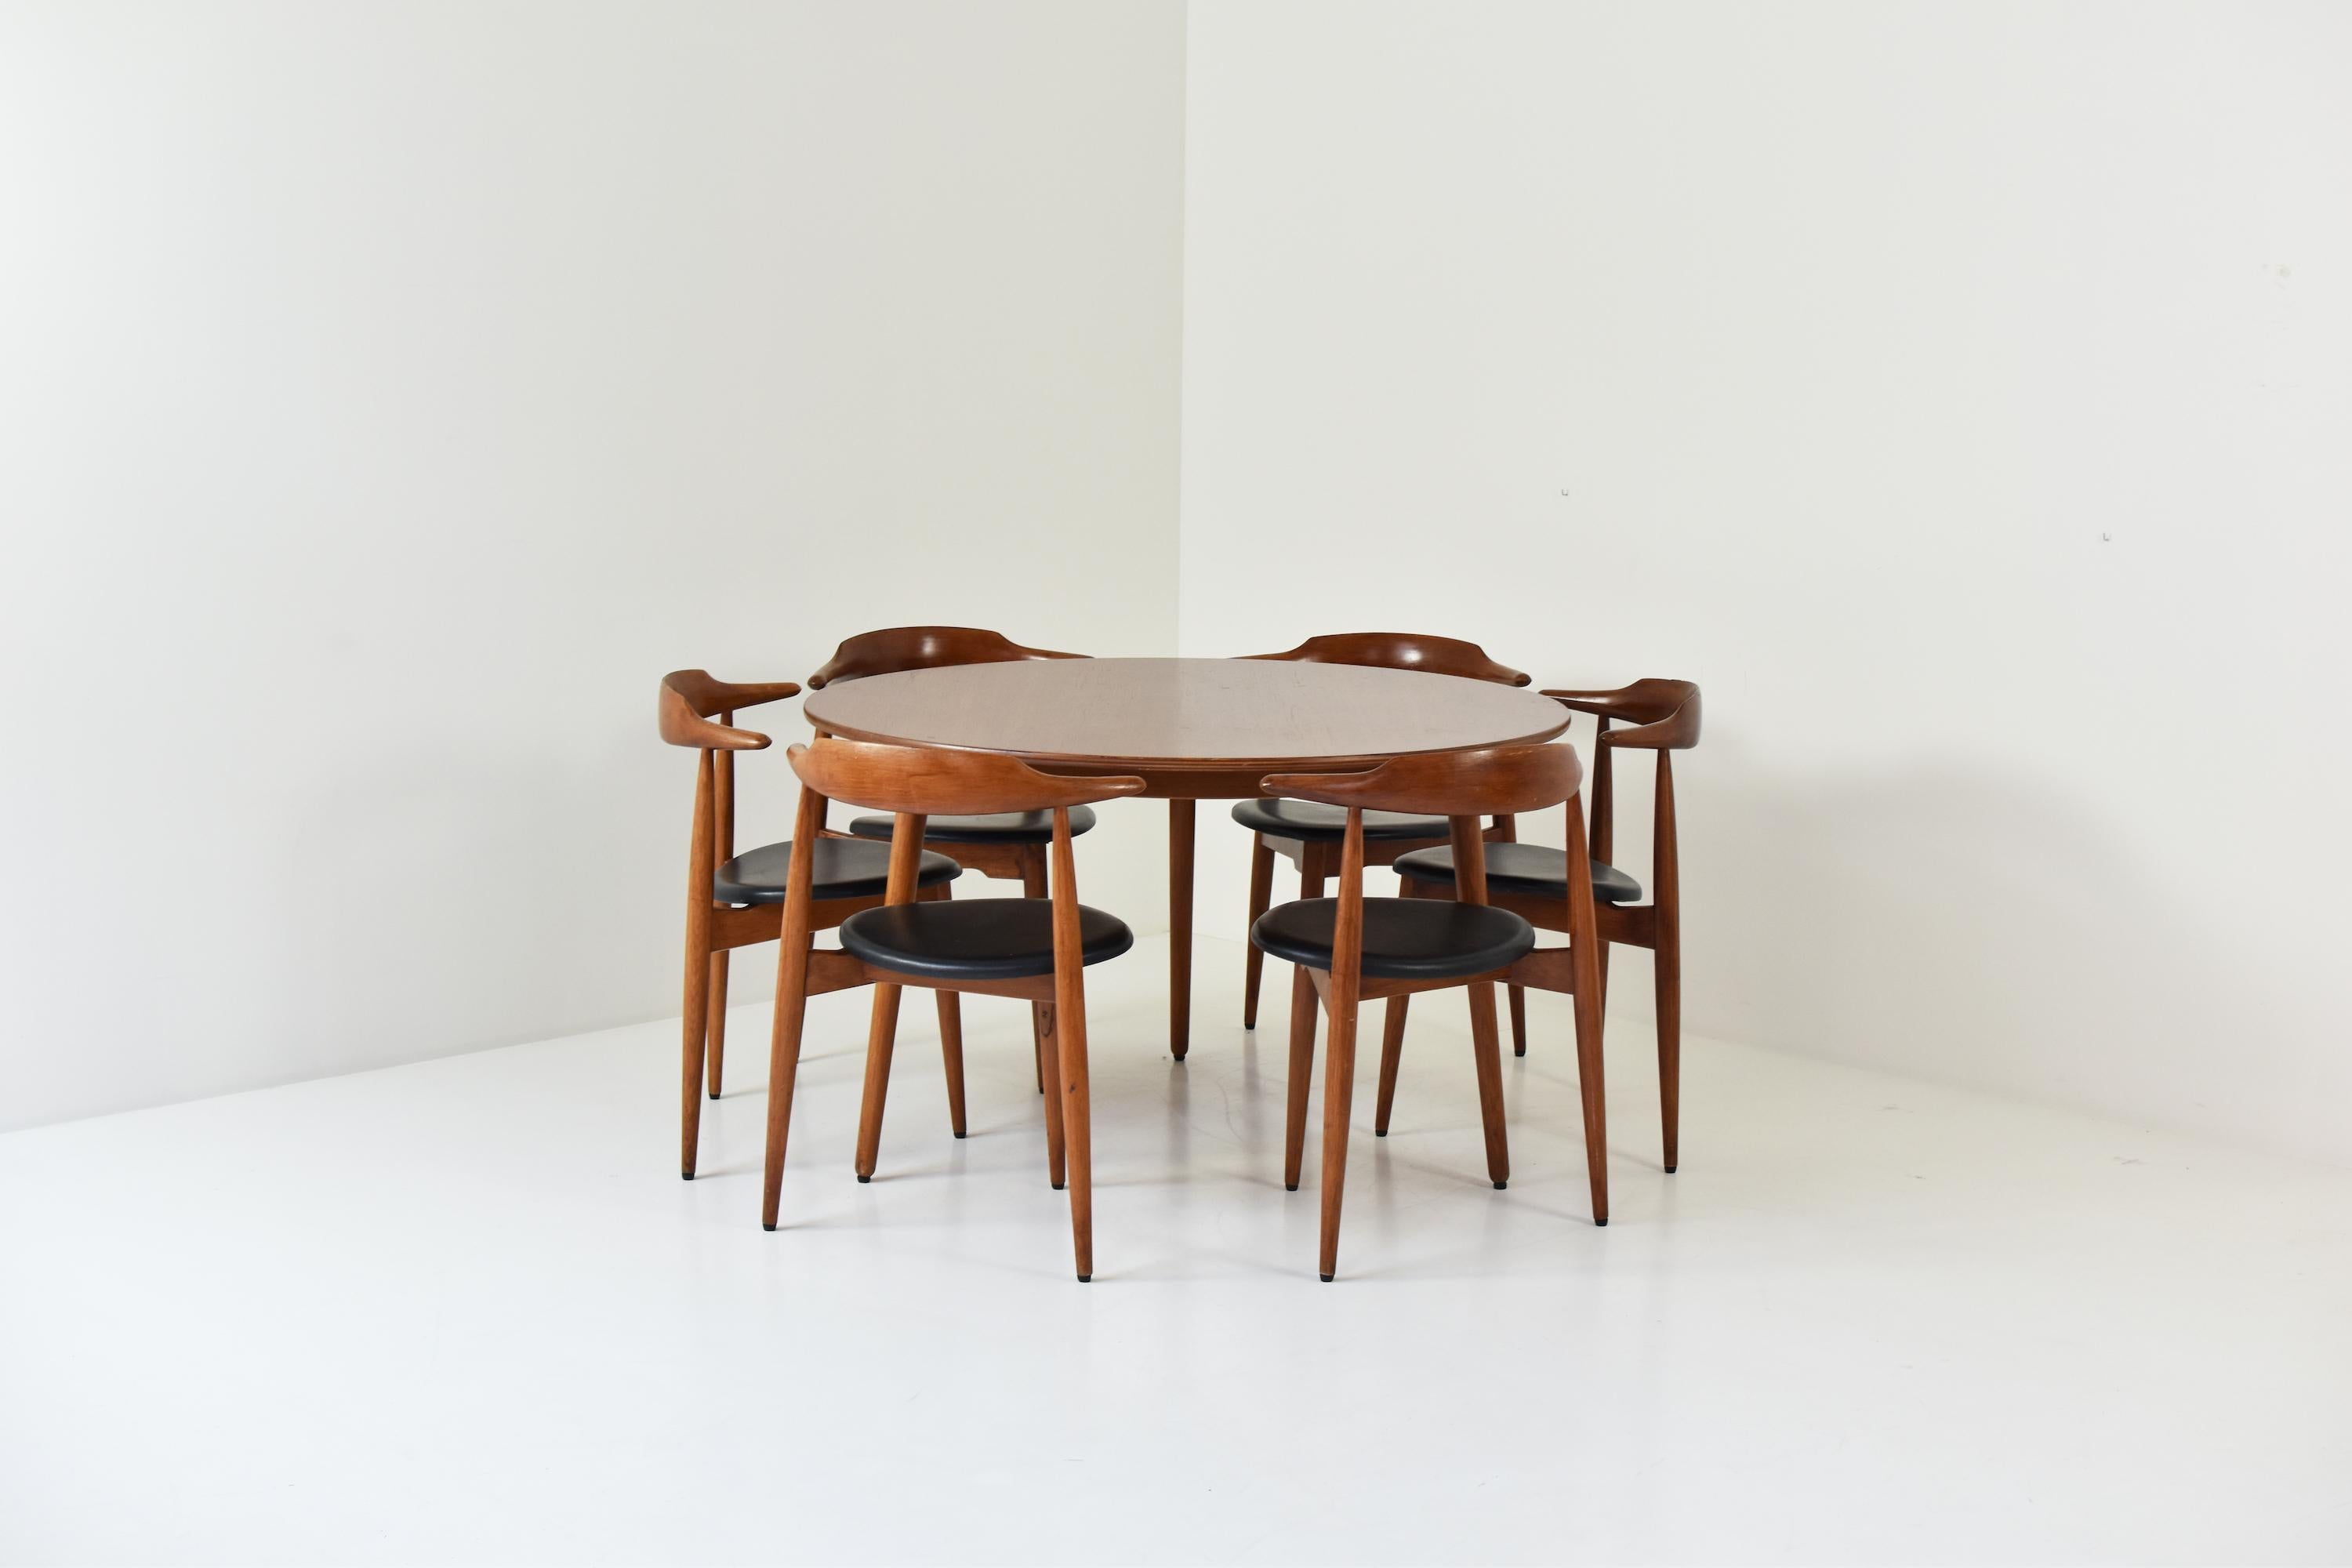 ‘Heart’ dinner set by Hans Wegner for Fritz Hansen, Denmark 1952. This set consists of one table and six chairs. Made out of teak, oak and black skai leather. Good original condition, some chairs have some restoration marks. Labeled.

Measures: H